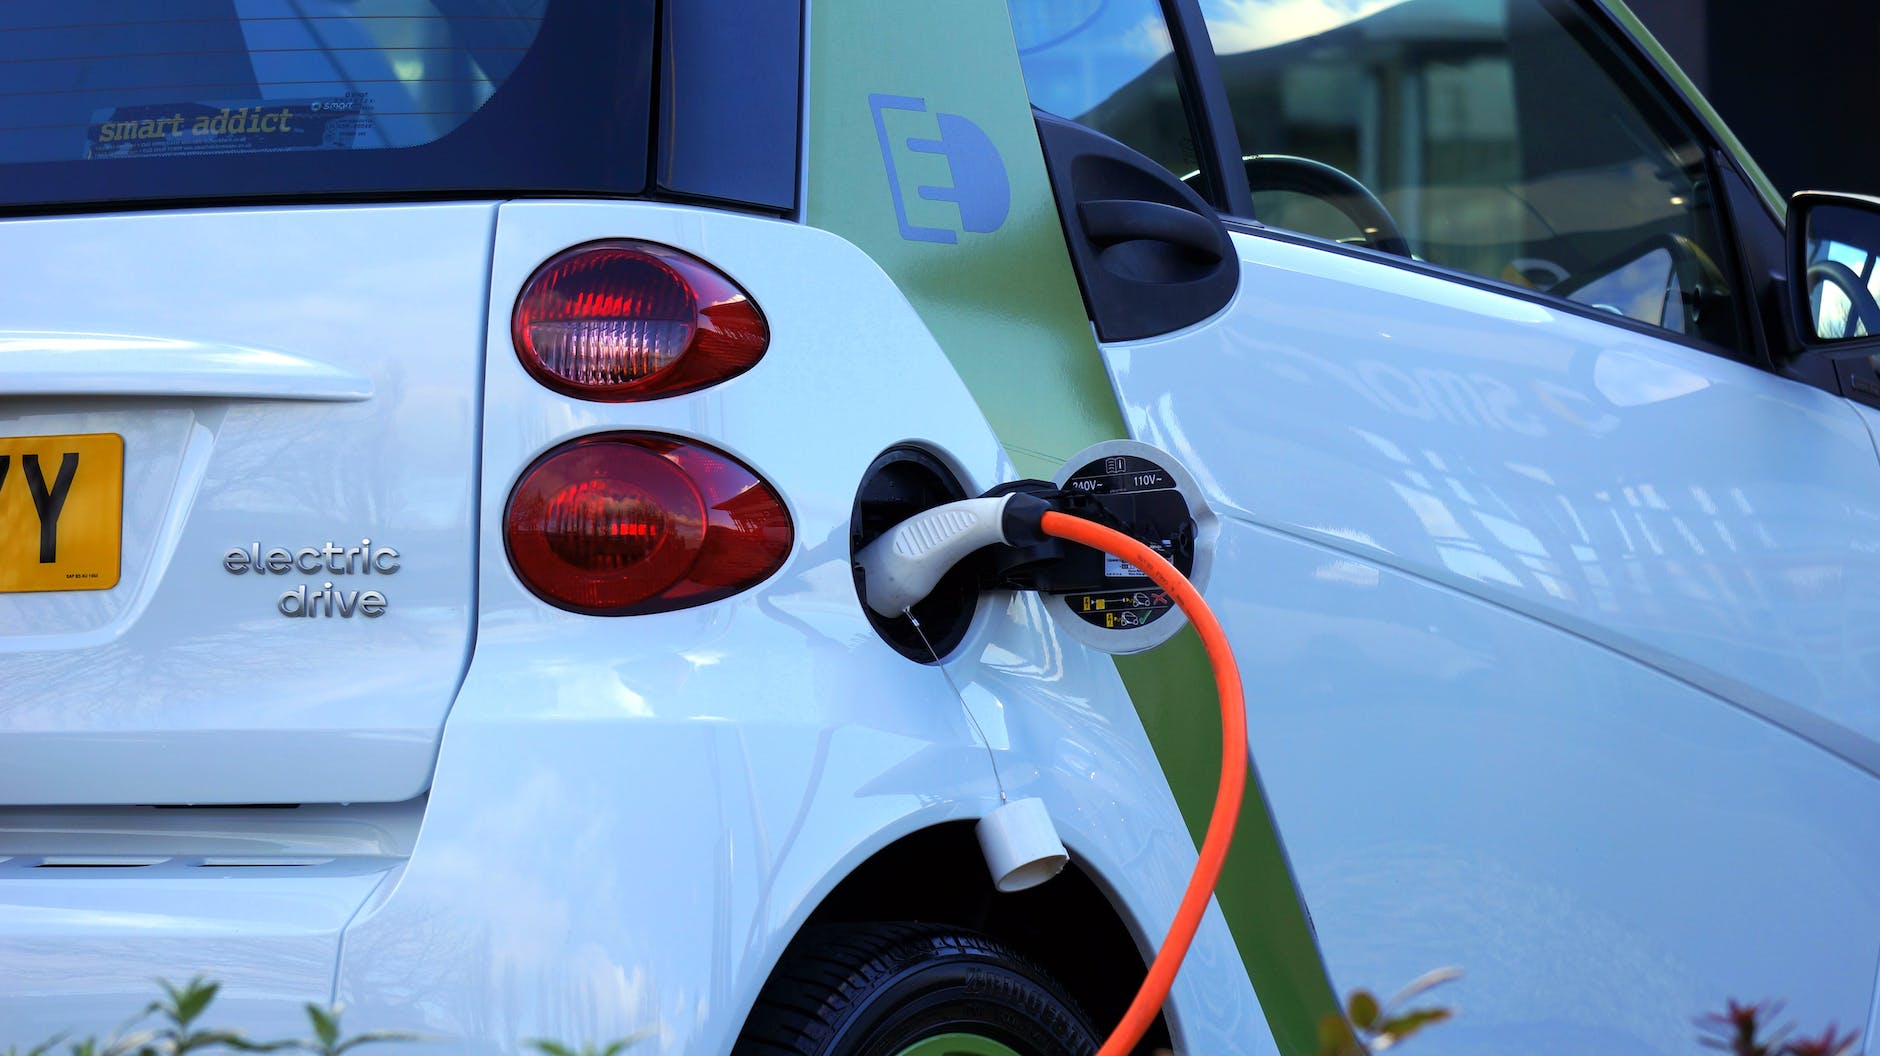 AM800 CKLW: Is Canada’s infrastructure prepared for the EV boom?